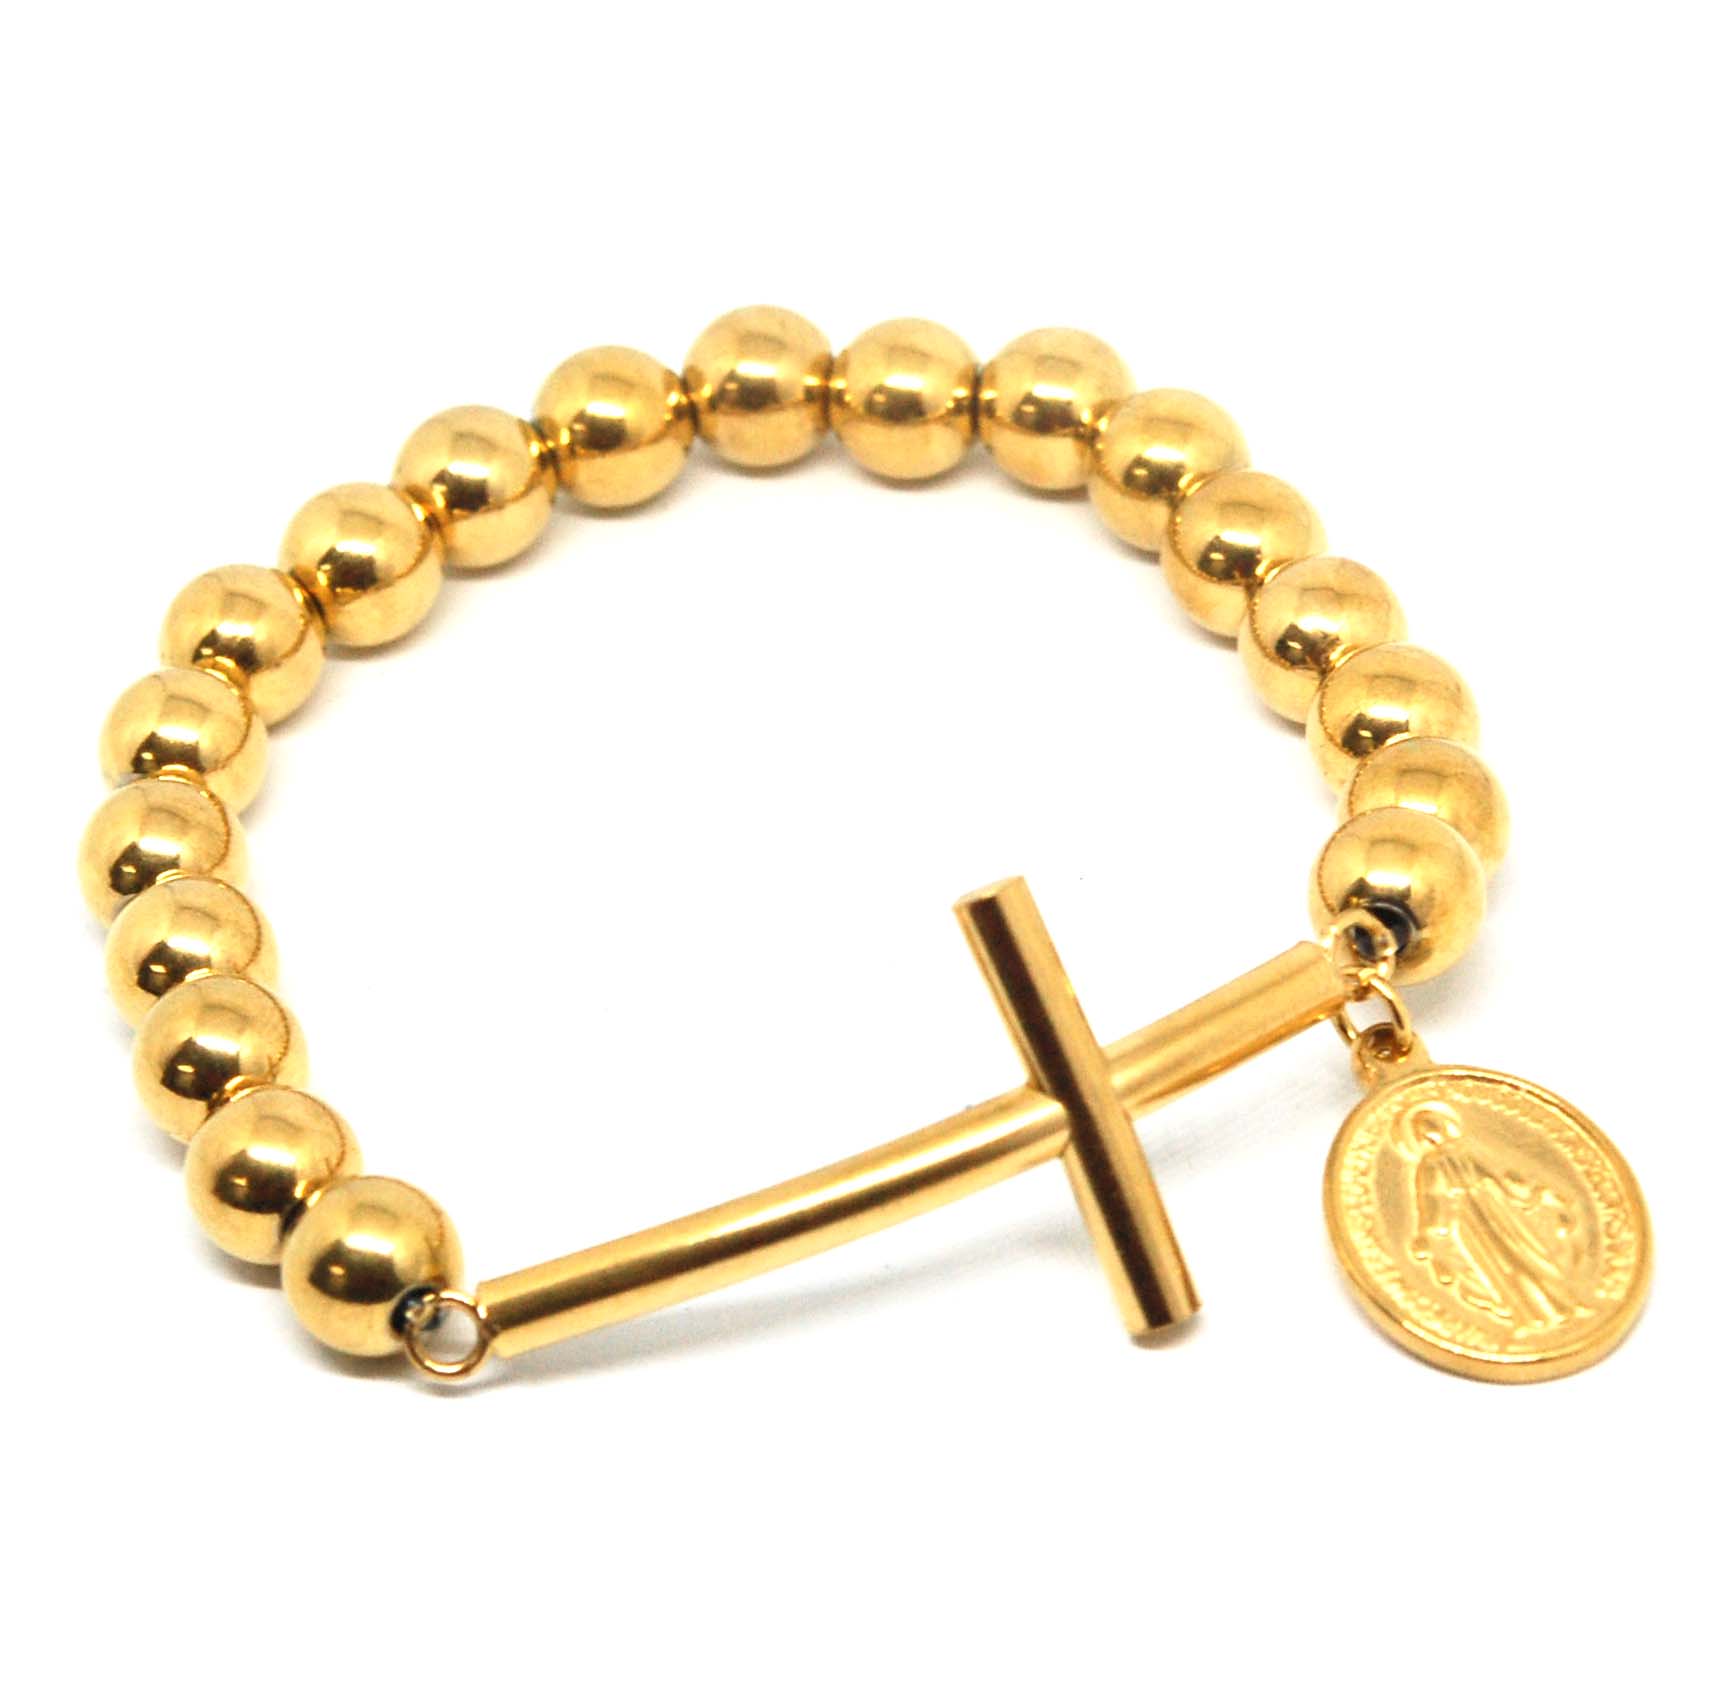 ESBL 6583: Gold Plated 19-Steel Ball Bracelet w/ Crucifix Center & Rosary